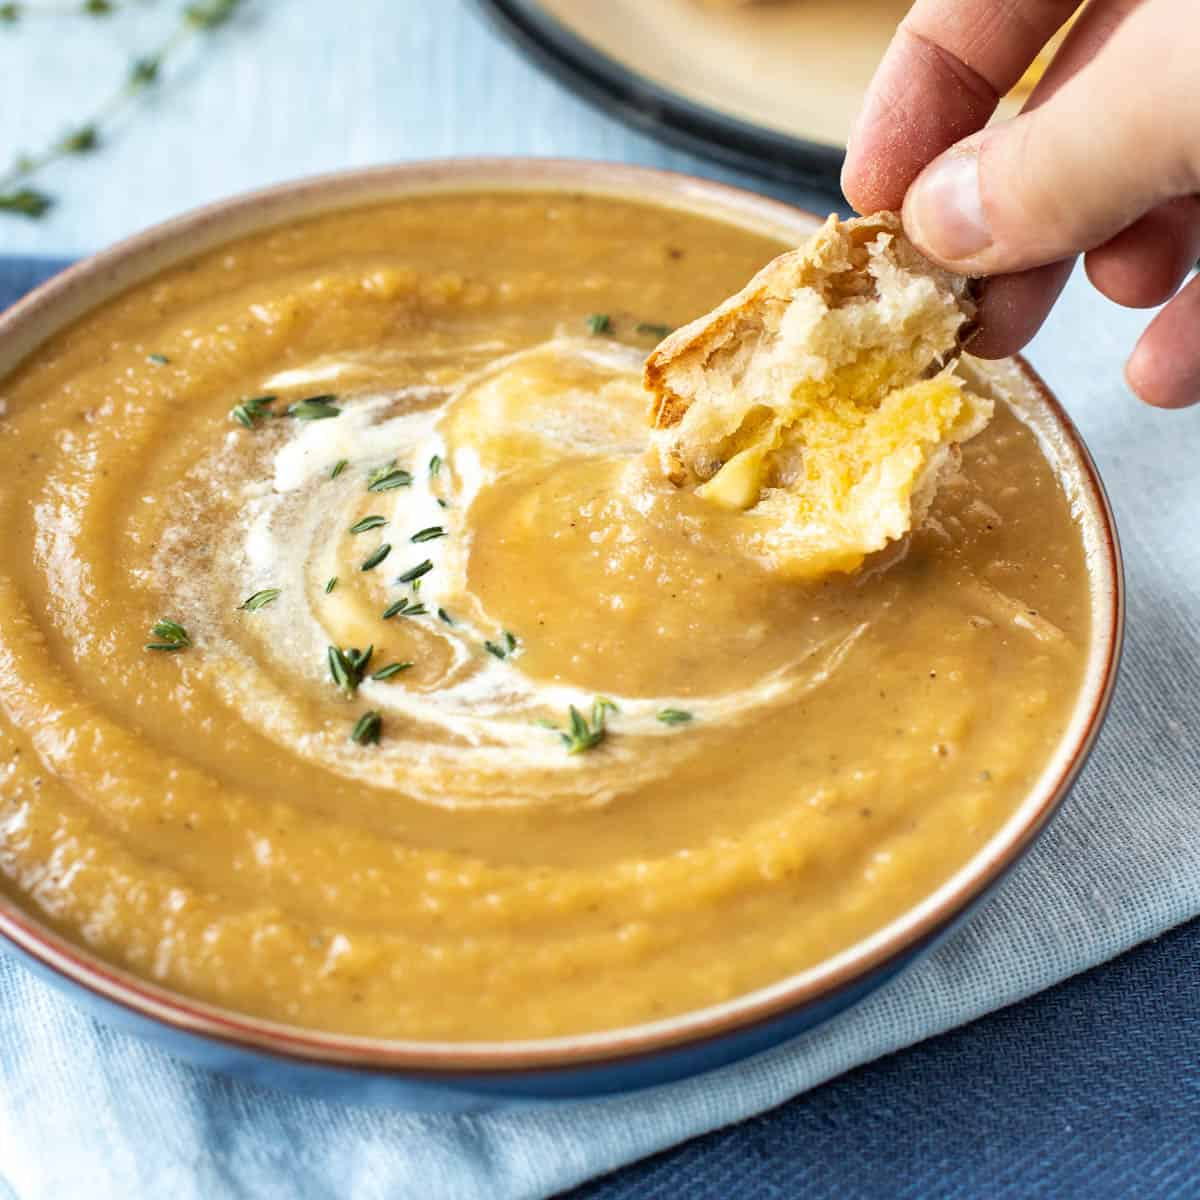 A hand dipping some crusty bread into a bowl of honey roasted parsnip soup.